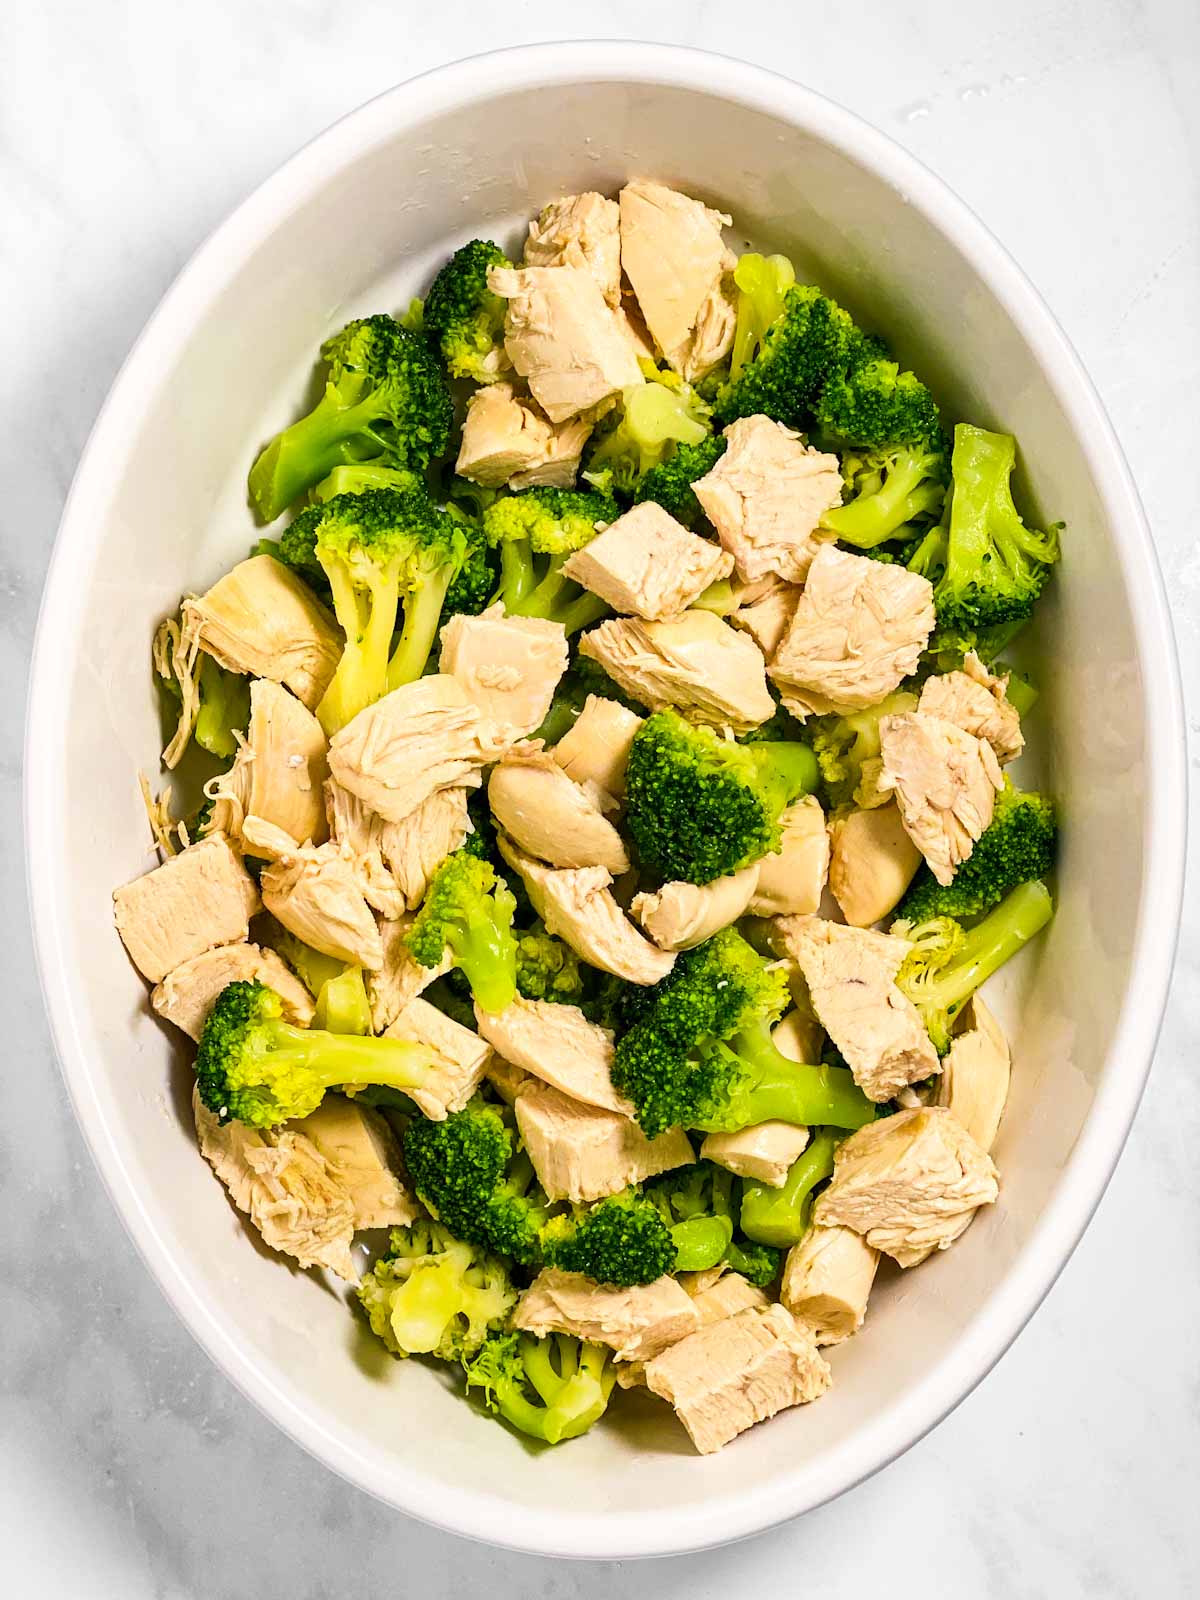 cooked, diced chicken and broccoli in white oval casserole dish